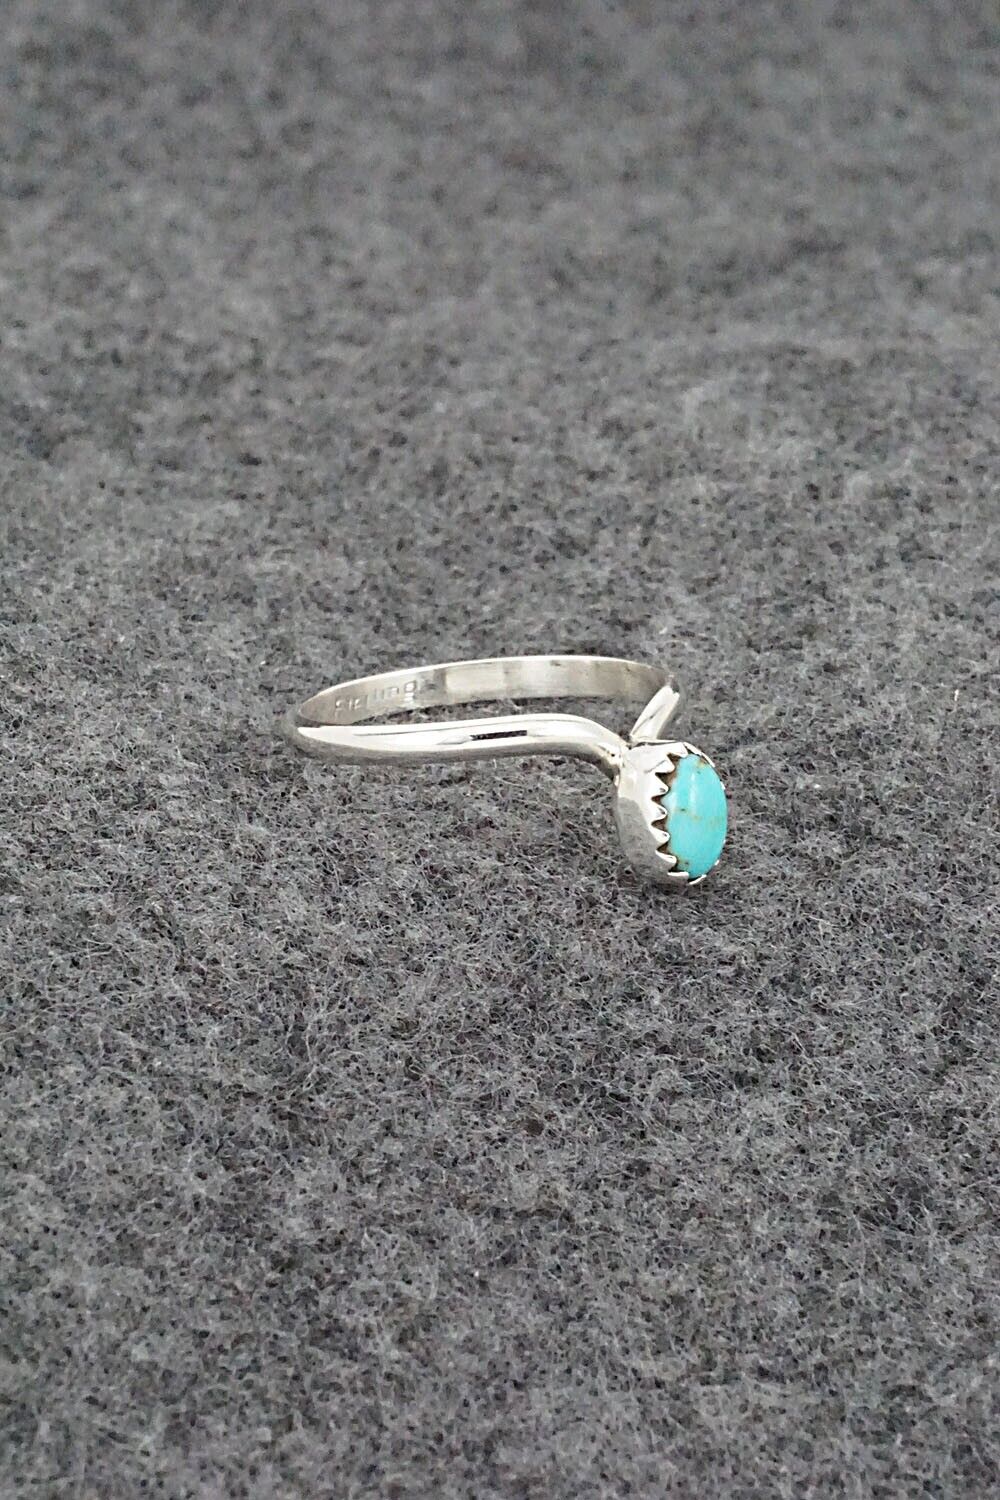 Turquoise & Sterling Silver Ring - Hiram Largo - Size 9.5